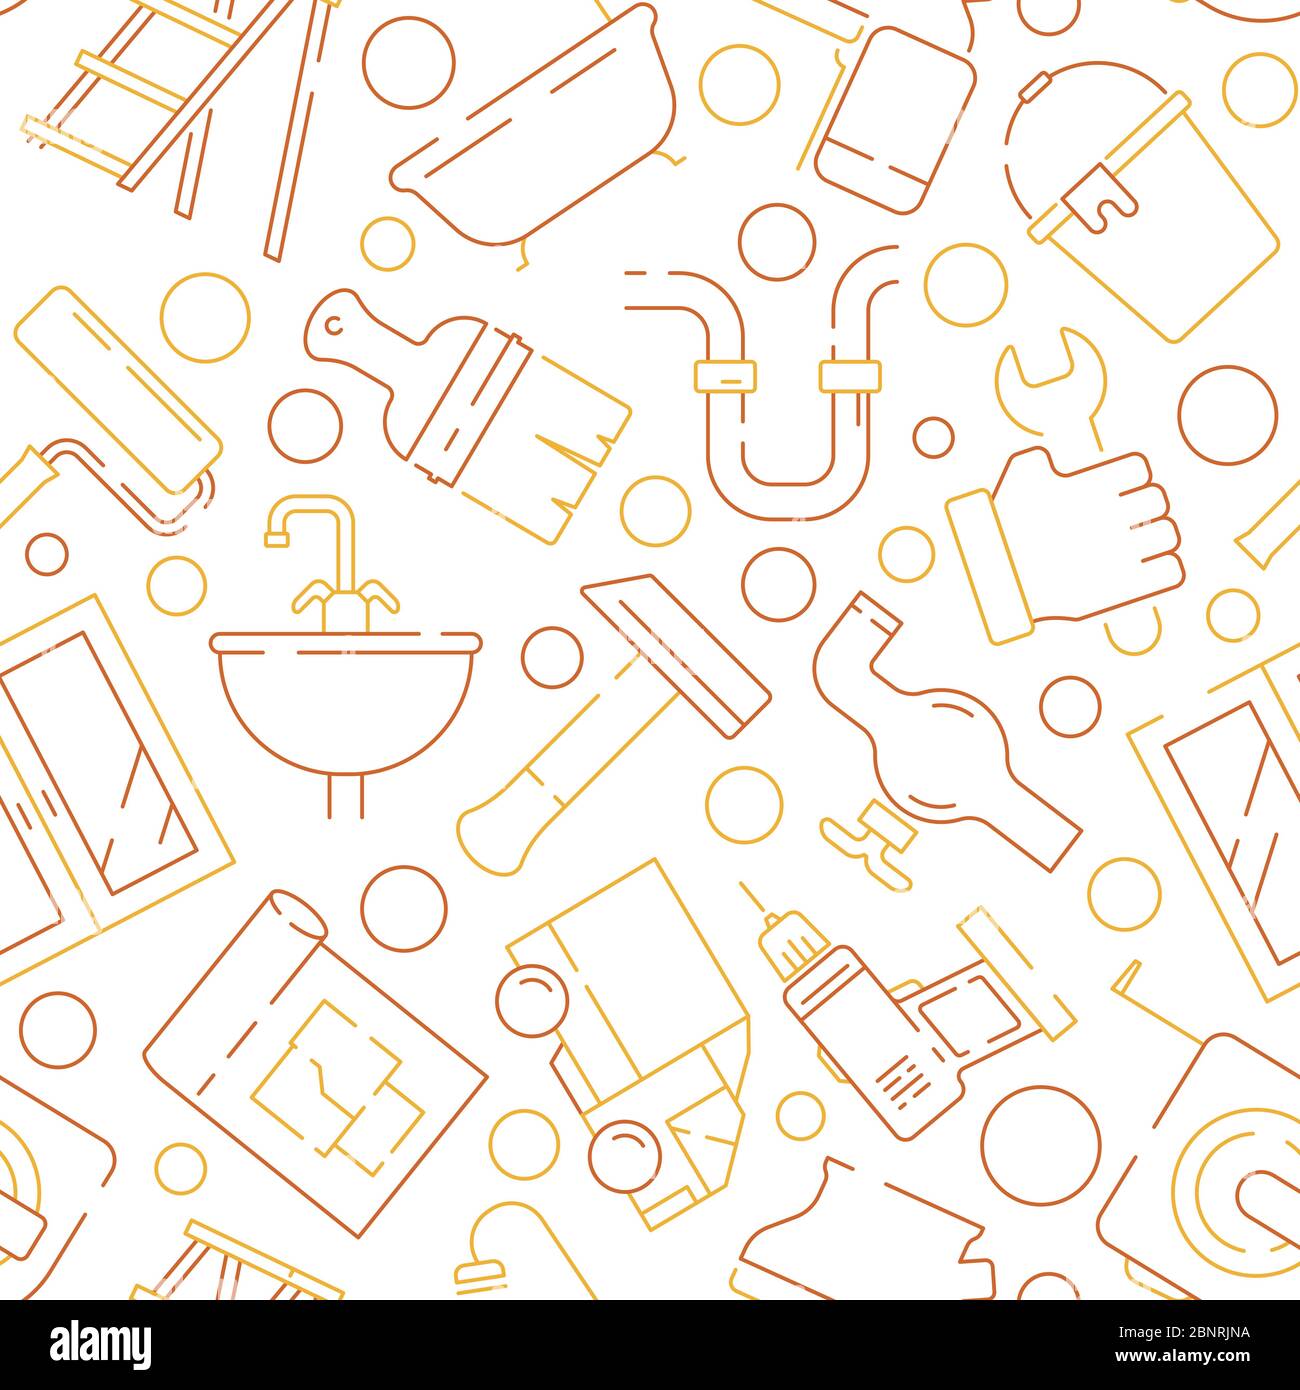 Repair equipment pattern. Support service items construction tools roller carpenter drill hammer vector seamless background Stock Vector